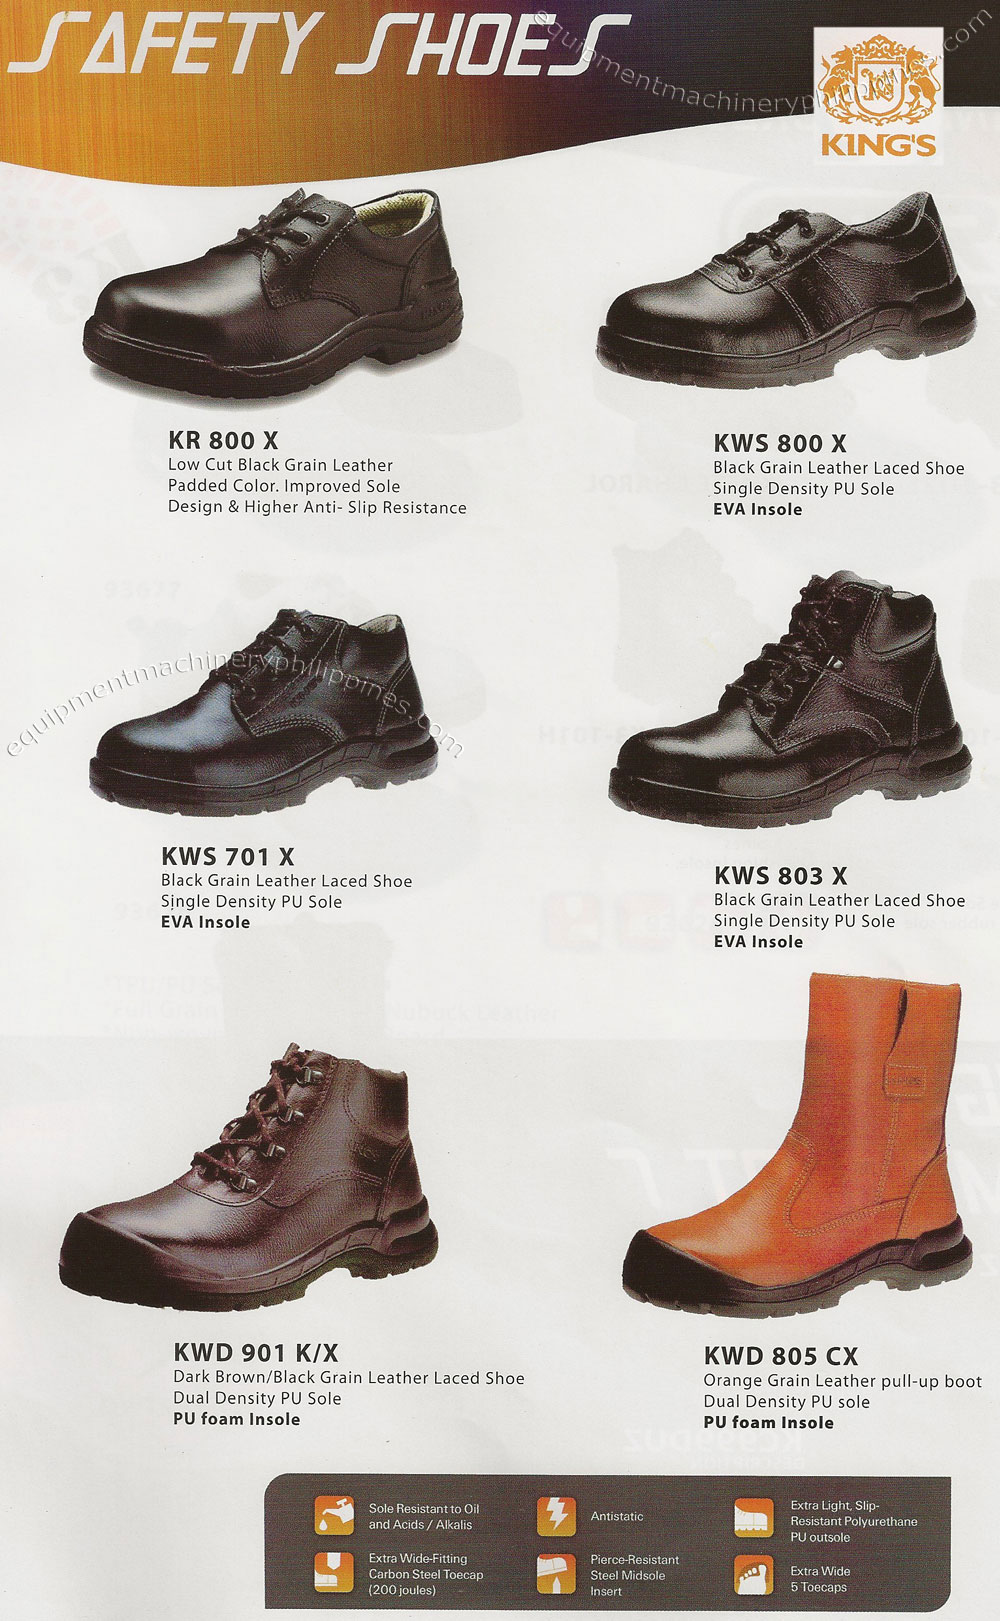 Personal Protective Equipment (PPE) - Safety Shoes